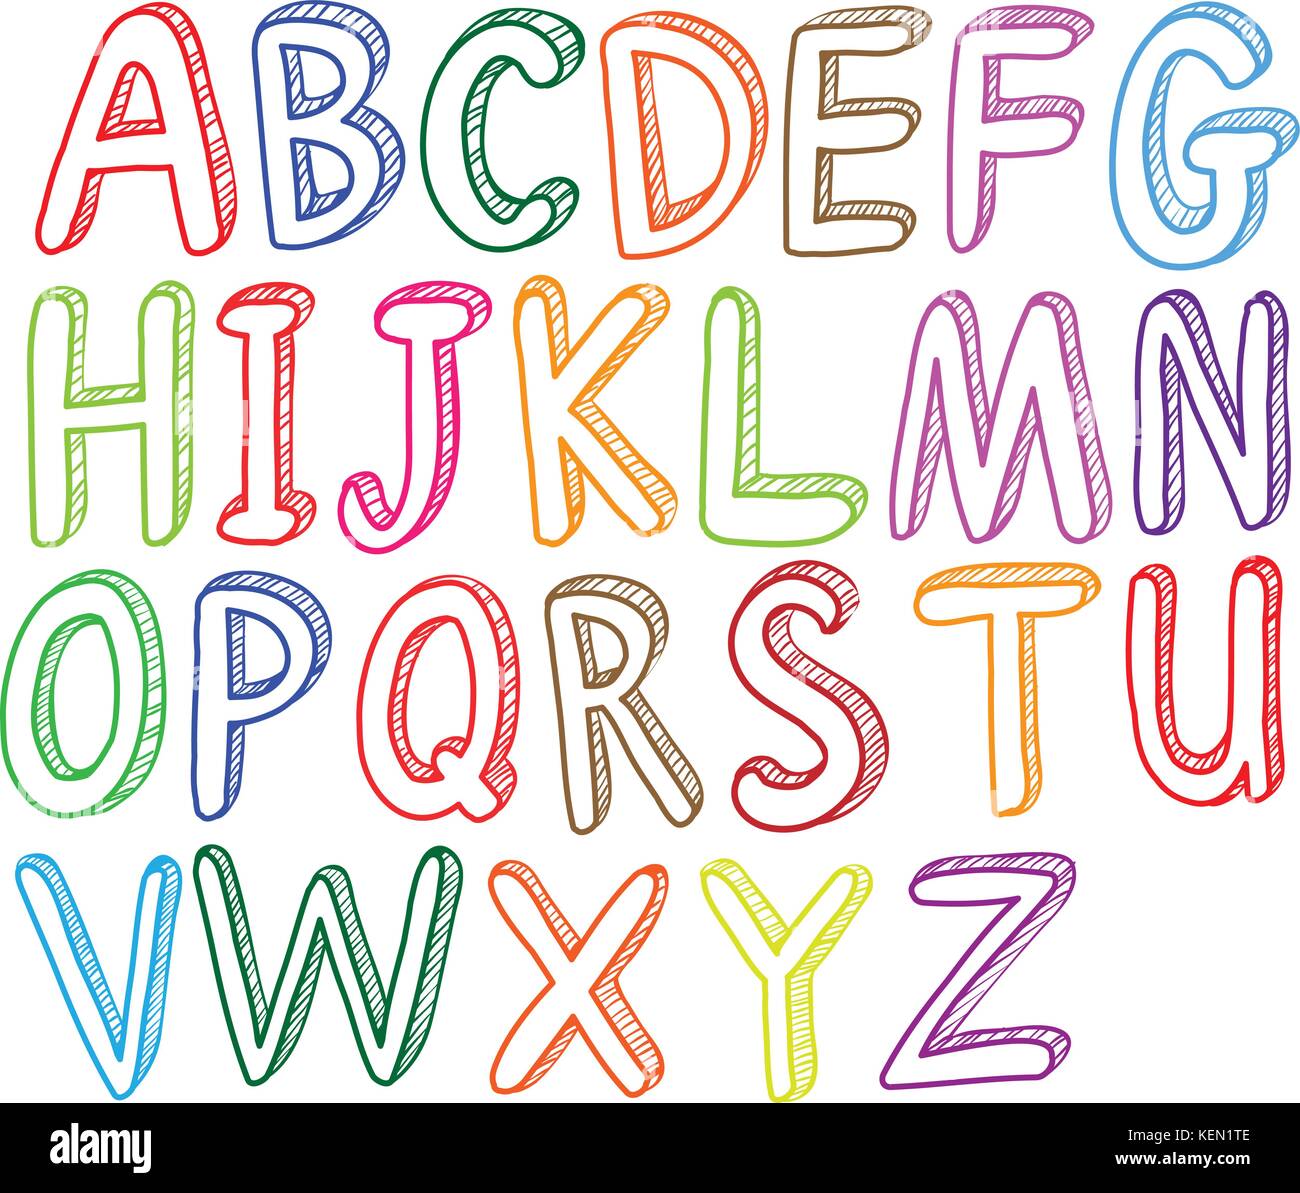 Illustration of the colorful font styles of the alphabet on a ...